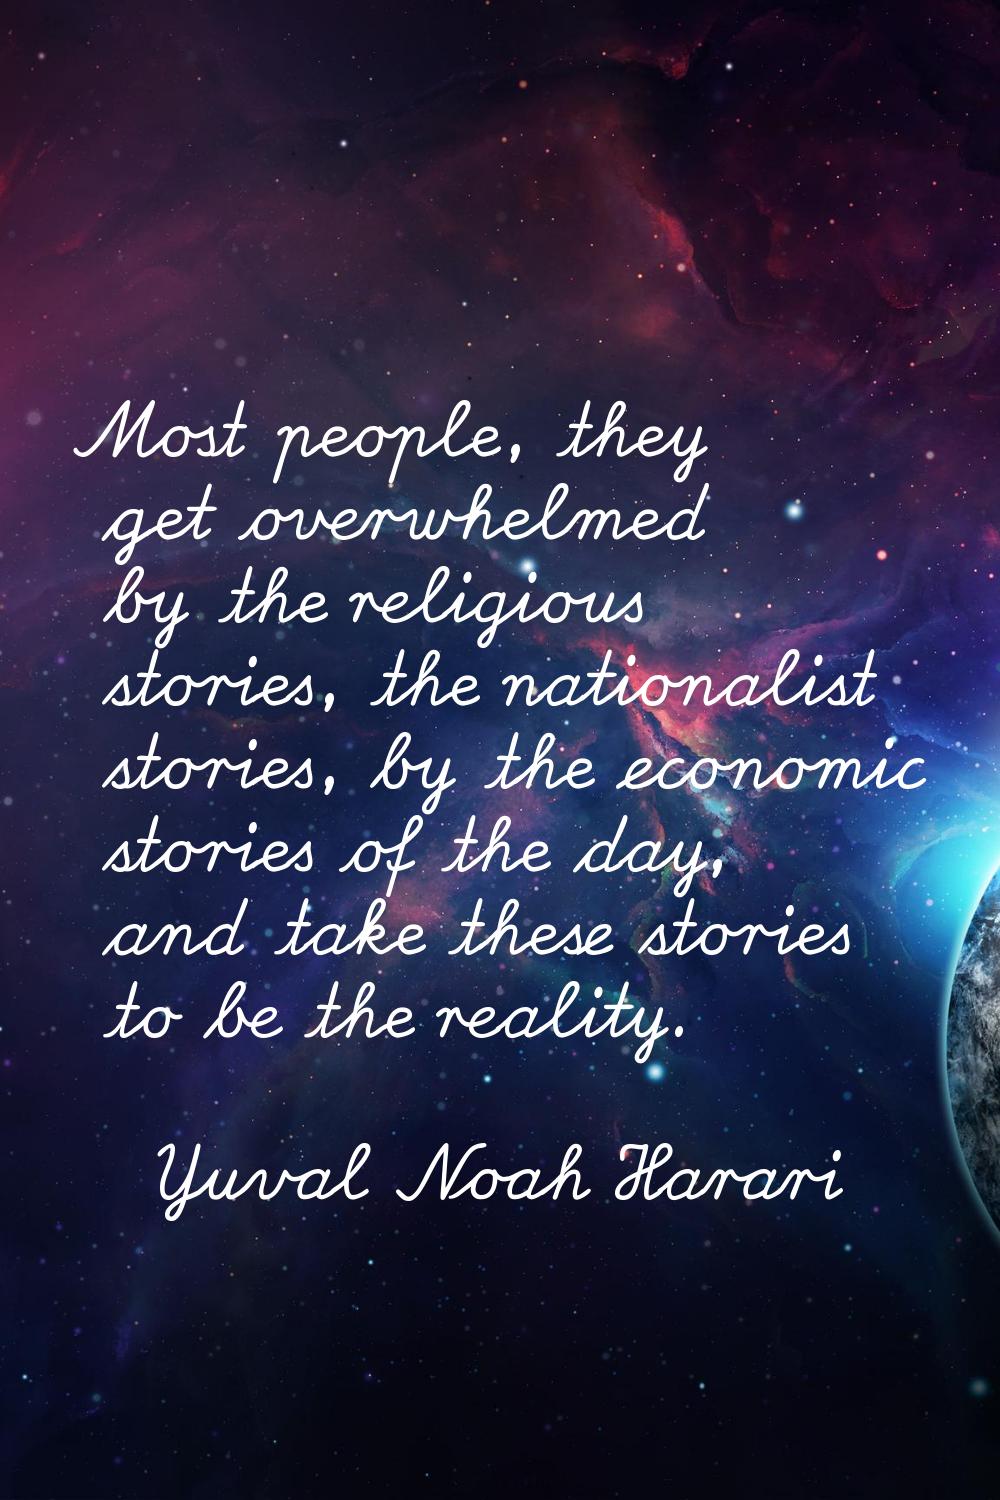 Most people, they get overwhelmed by the religious stories, the nationalist stories, by the economi